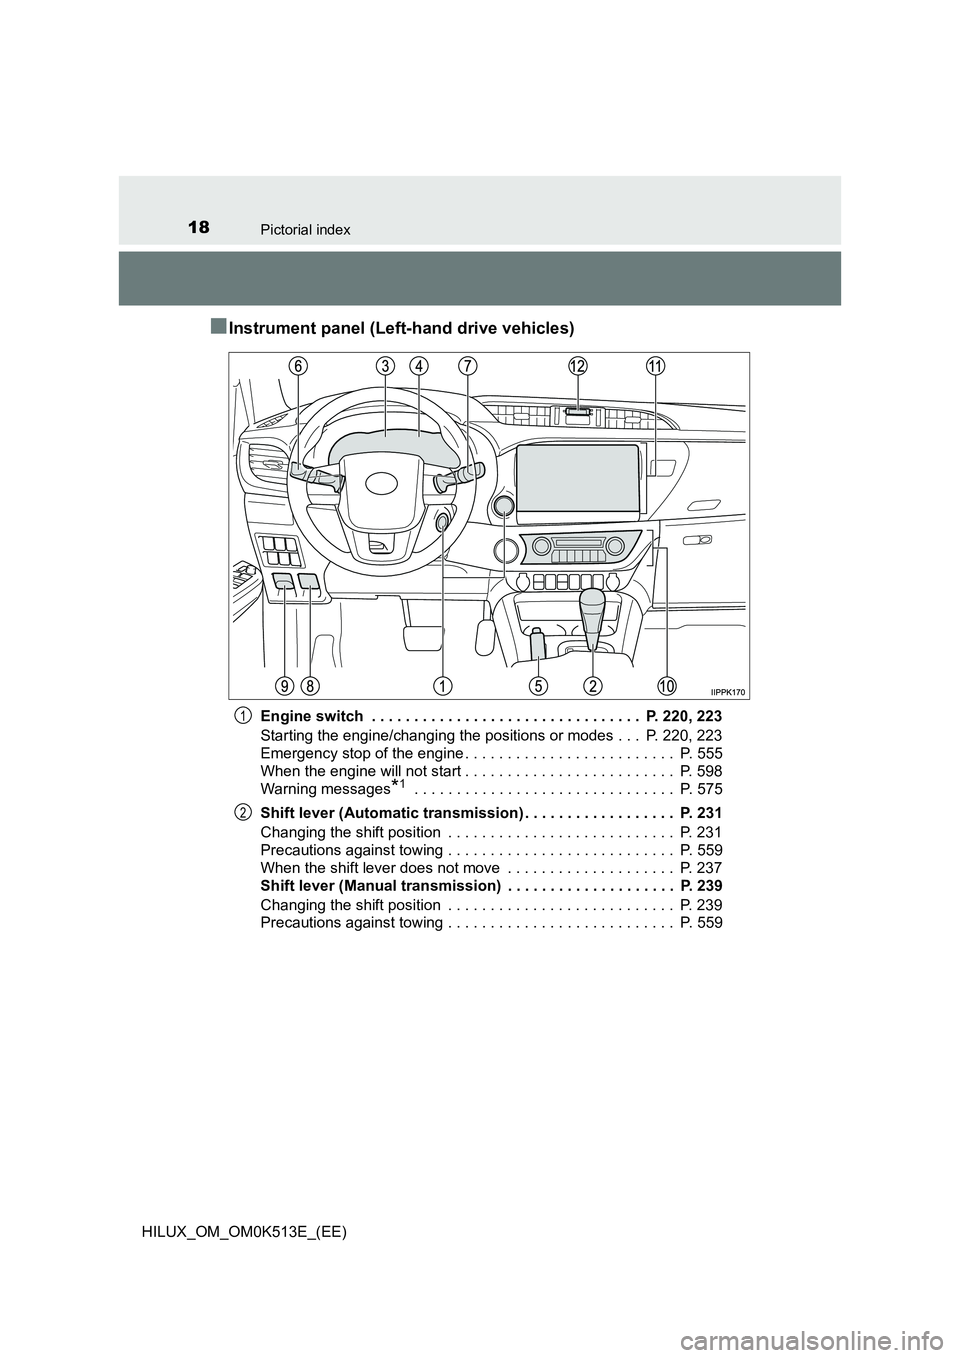 TOYOTA HILUX 2021  Owners Manual (in English) 18Pictorial index
HILUX_OM_OM0K513E_(EE)
�QInstrument panel (Left-hand drive vehicles)
Engine switch  . . . . . . . . . . . . . . . . . . . . . . . . . . . . . . . .  P. 220, 223 
Starting the engine/